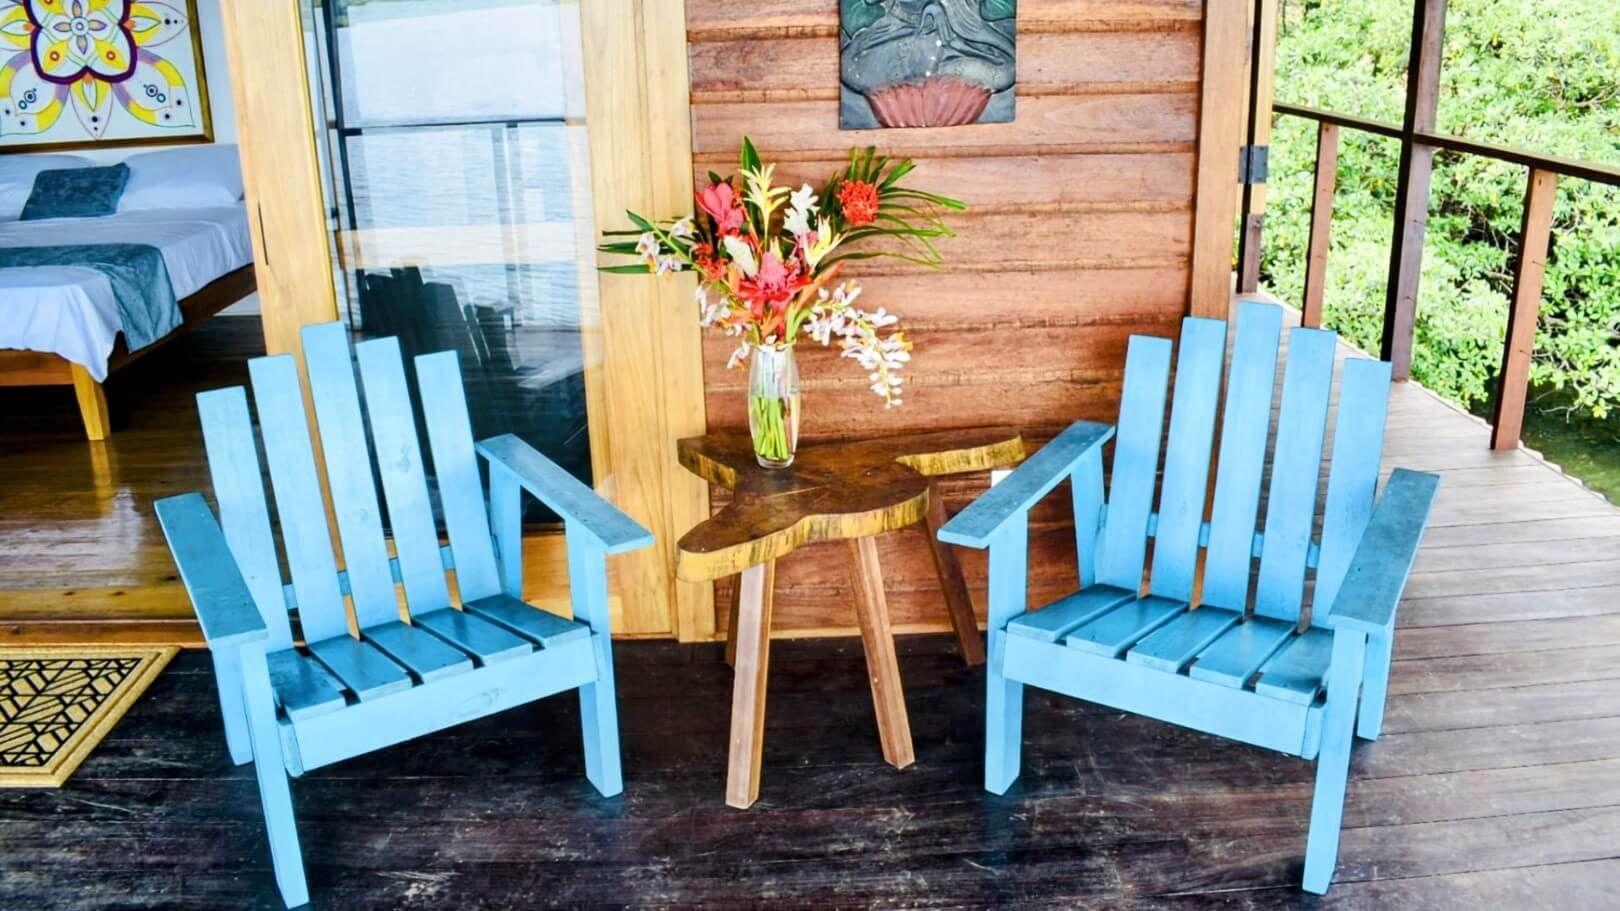 Two blue chairs and a table with flowers on top of it.